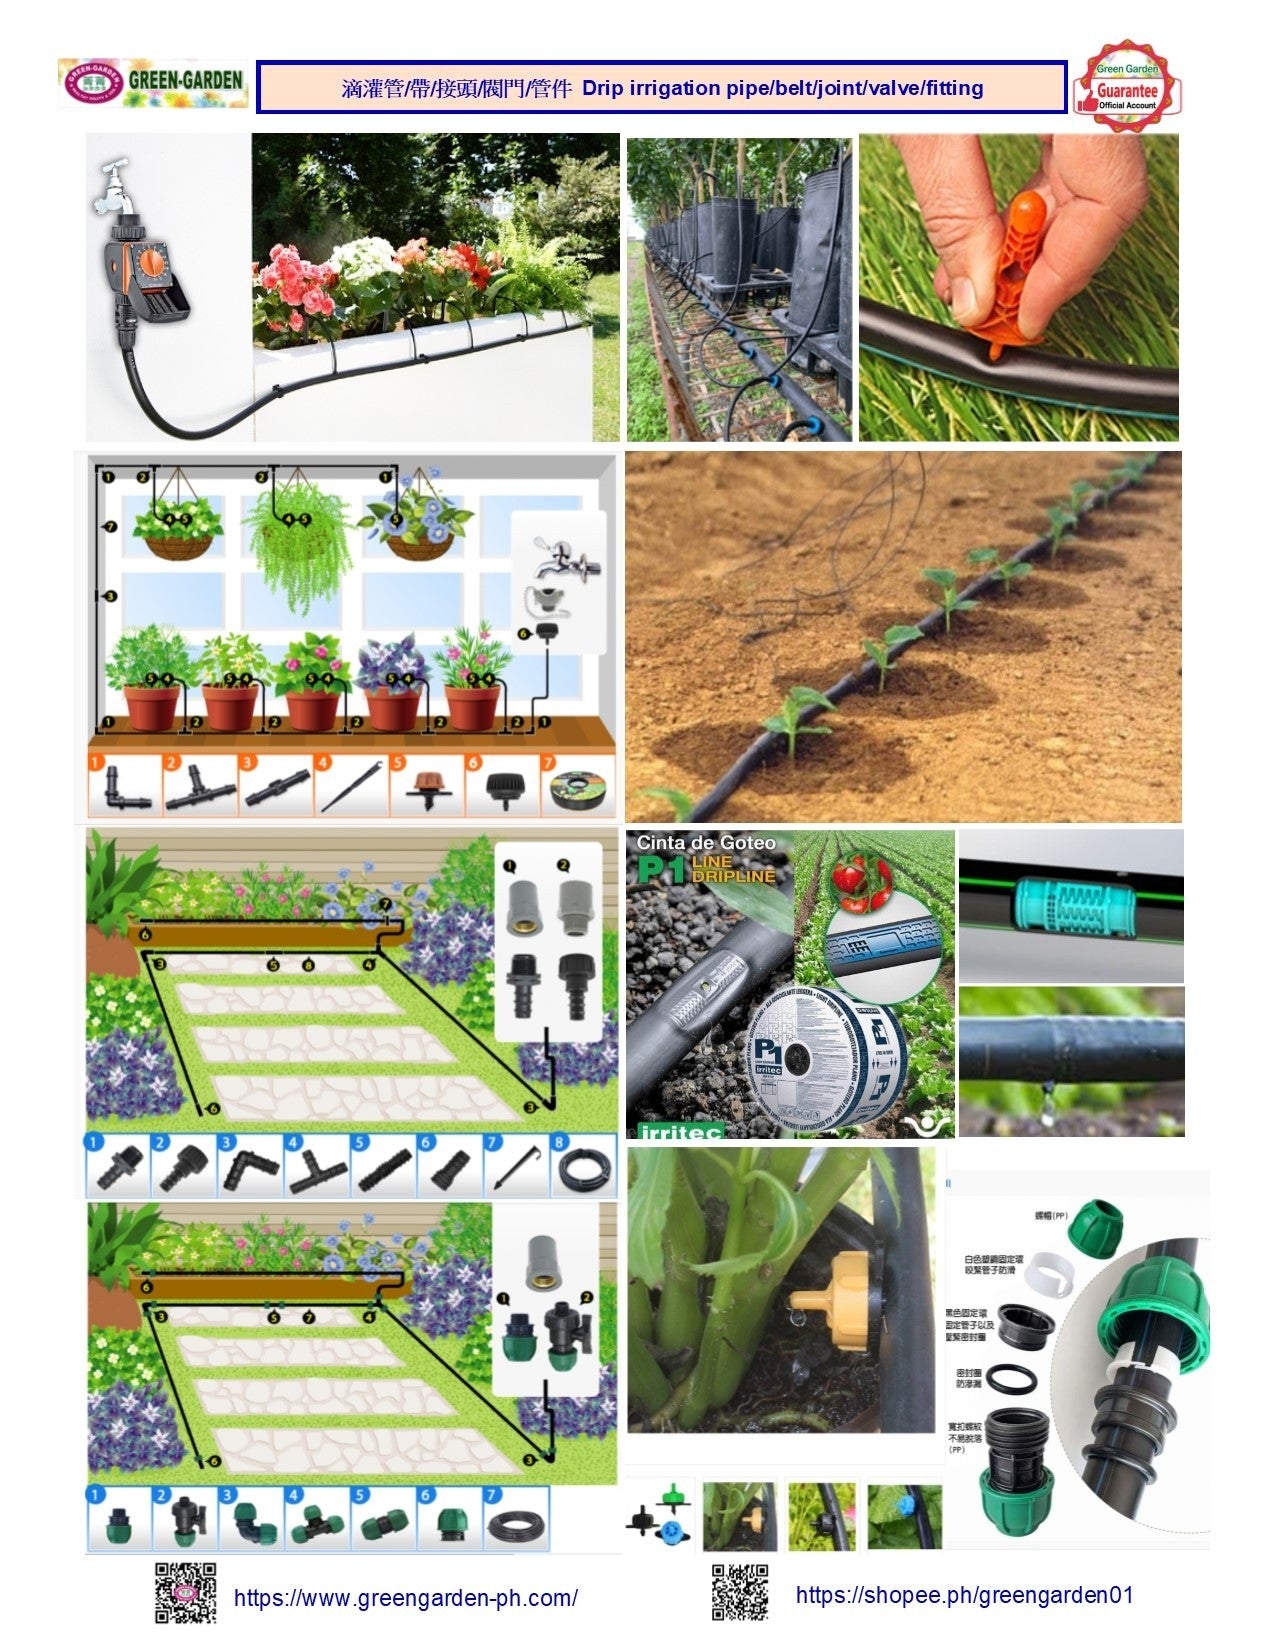 Drip Irrigation System - 25mm three-section tee joint BG41